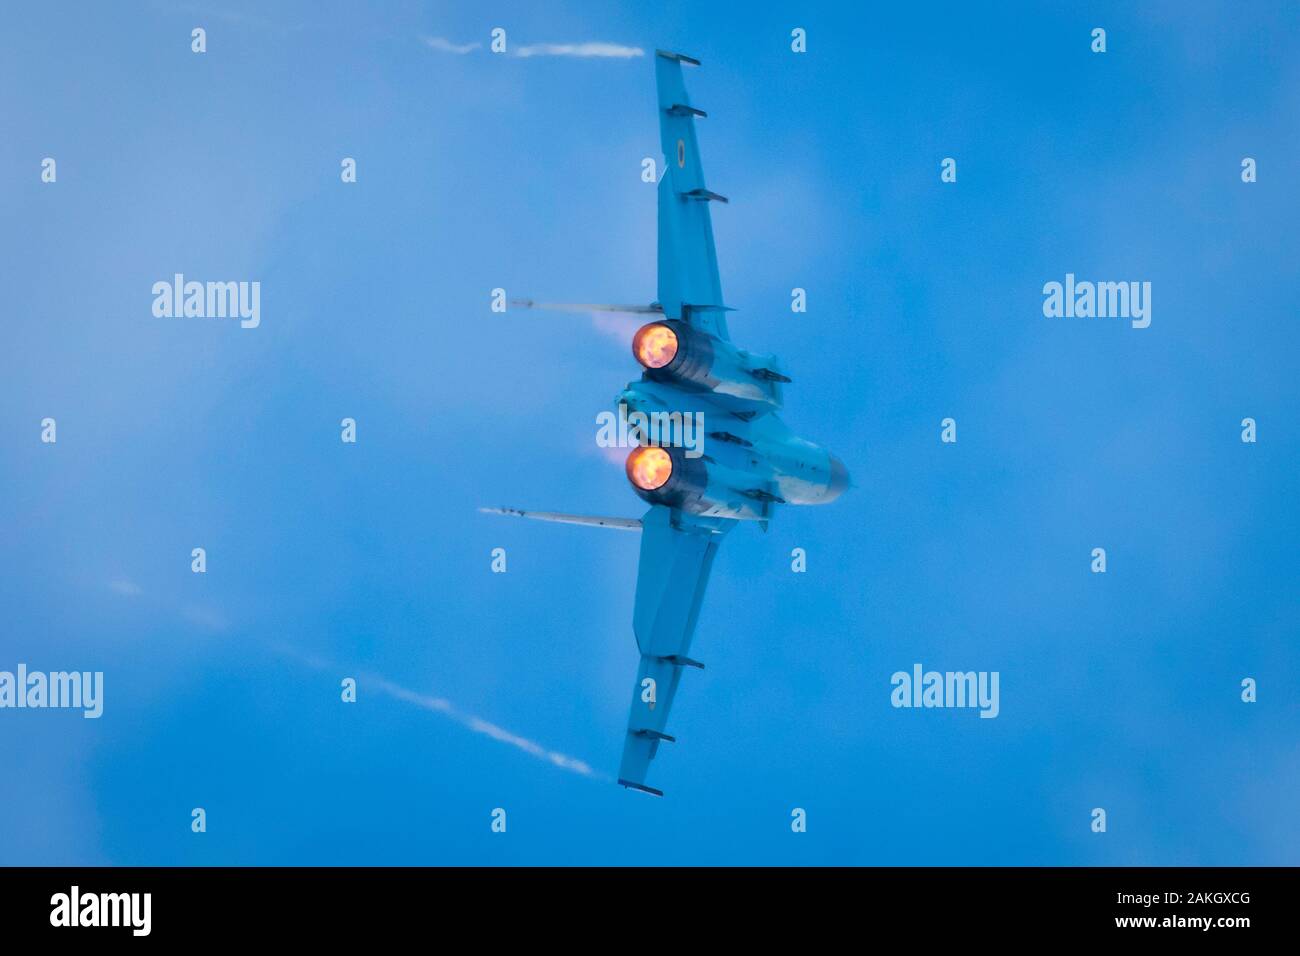 Fairford, Gloucestershire, UK - July 20th, 2019: Ex-Russian Soviet Cold War Ukrainian Sukhoi SU-27 Flanker Displays at the Fairford International Air Stock Photo